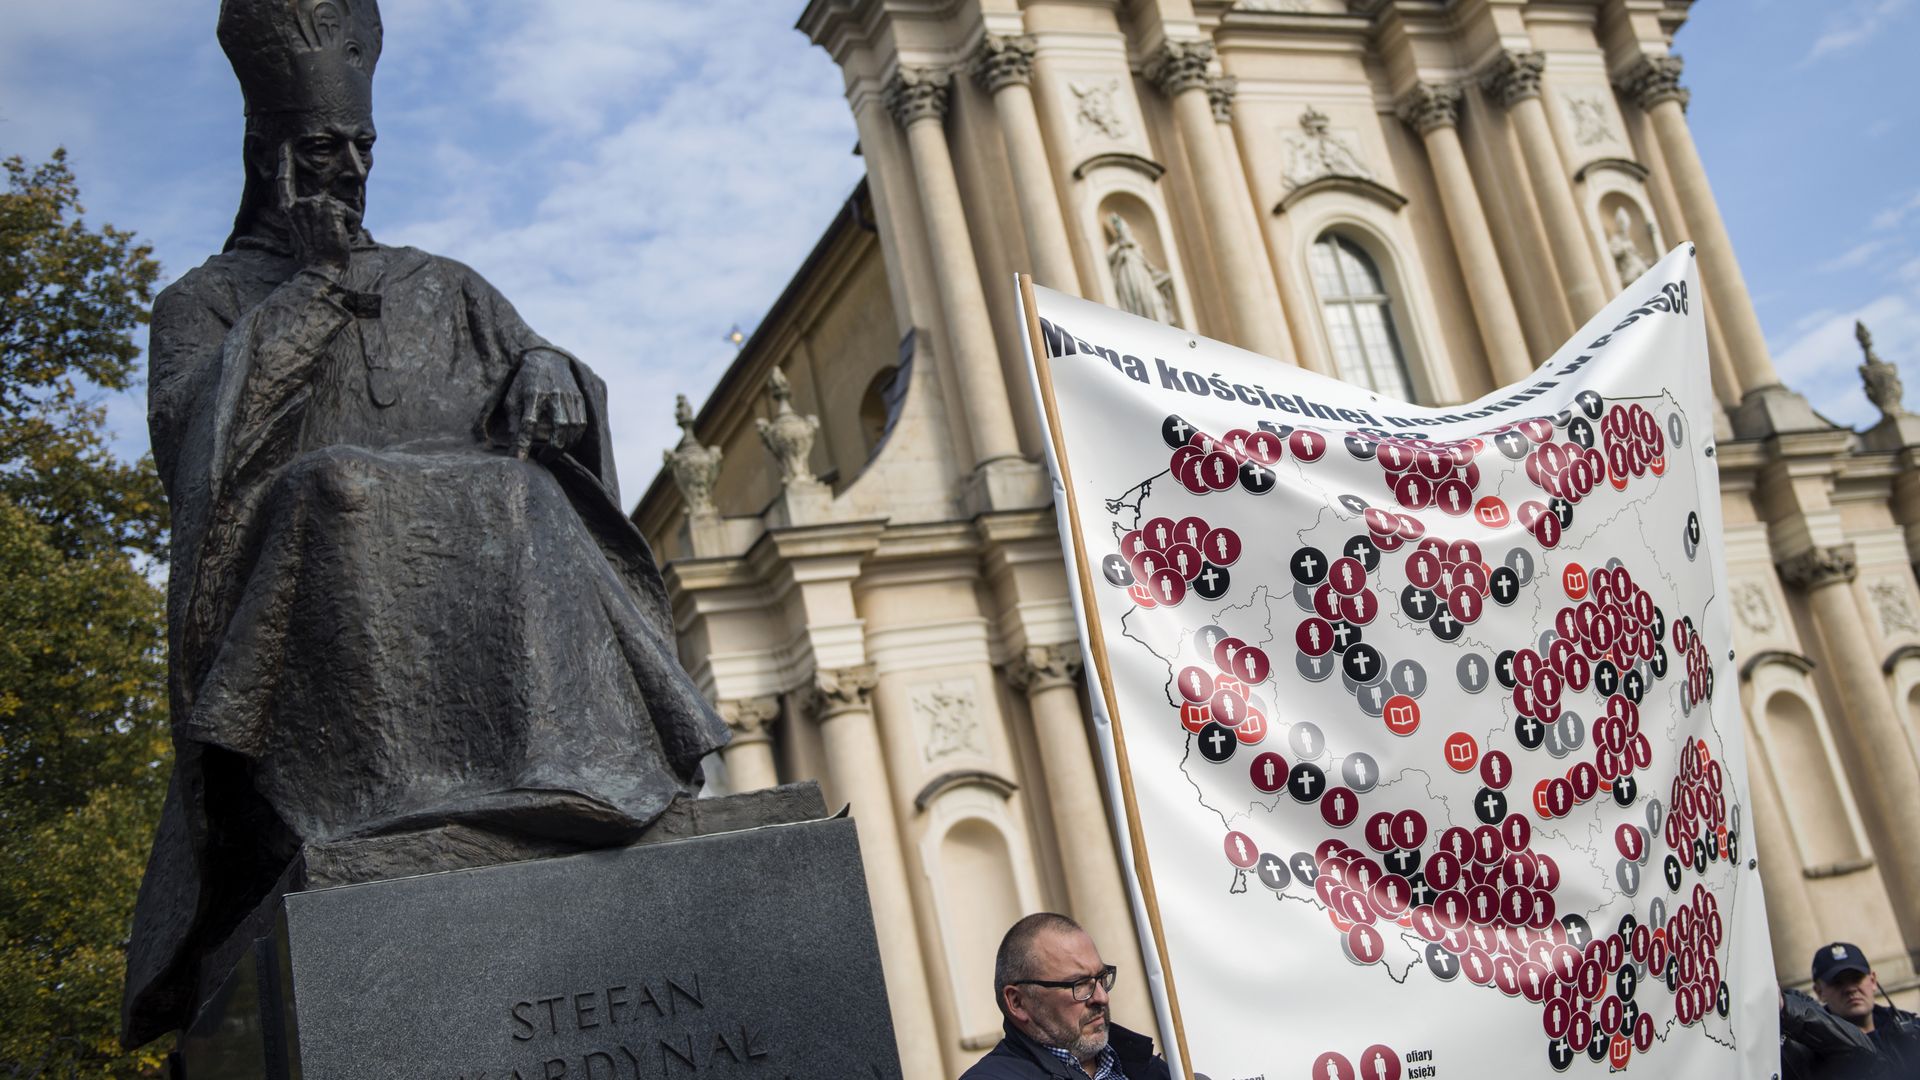 A demonstration outside a Catholic Church in Warsaw, Poland against catholic priests who committed pedophilia. 